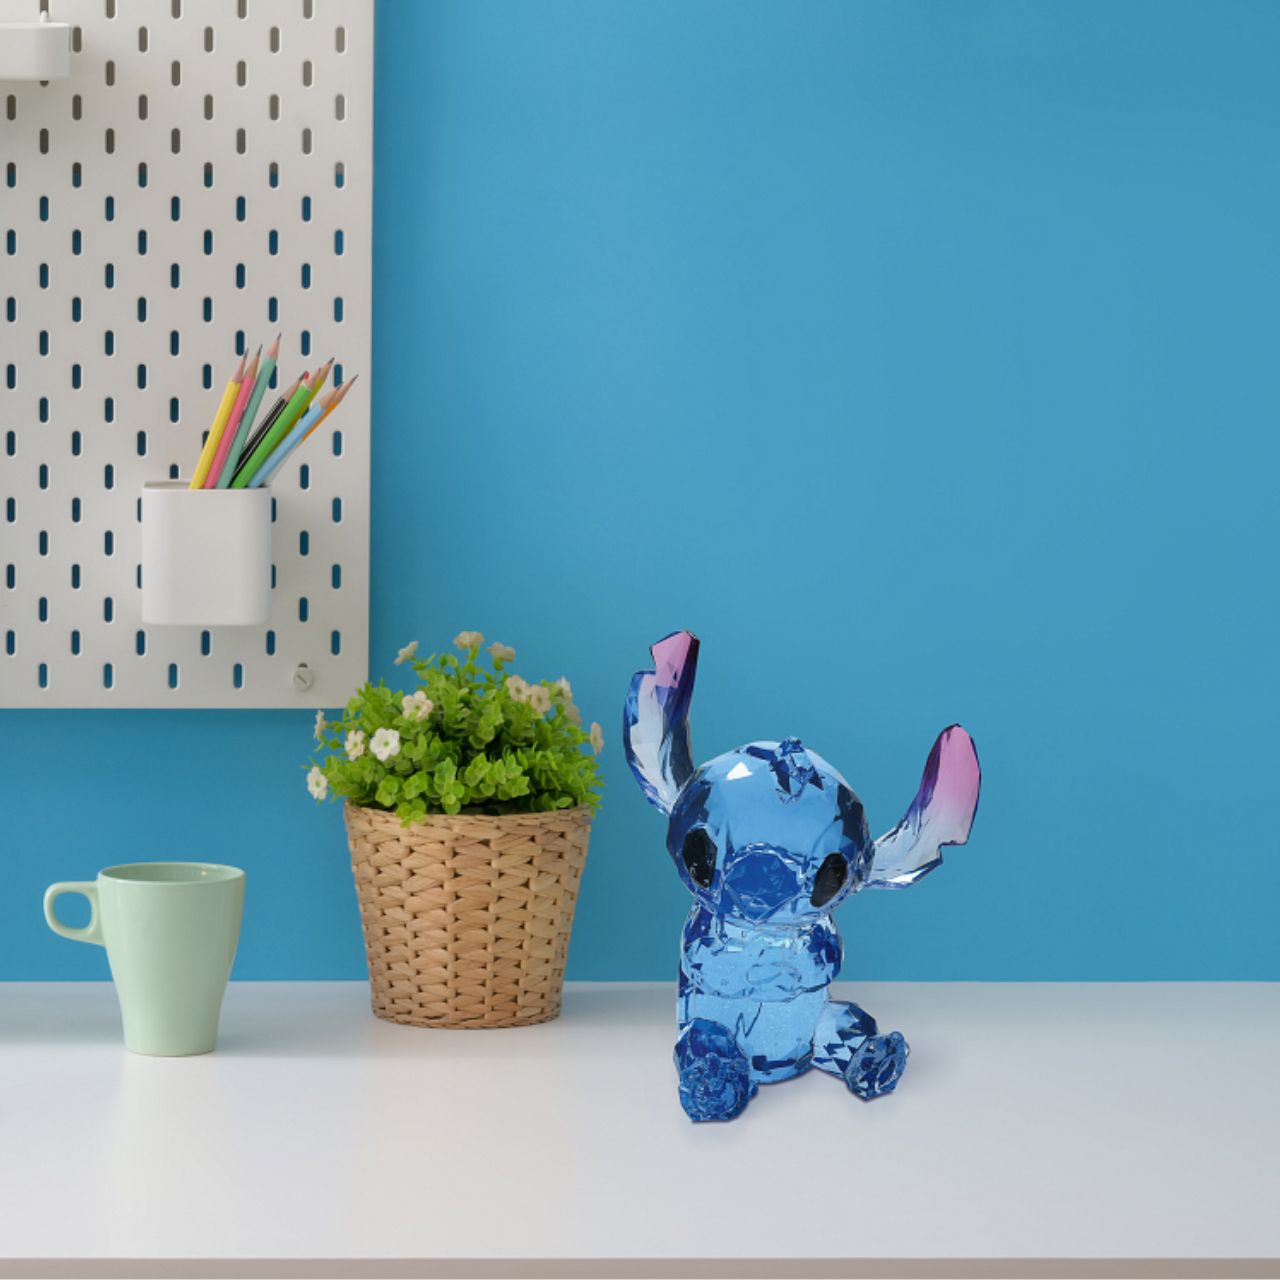 Celebrate your love for Disney with this statement "gem-cut" acrylic sculpture of your favourite Disney character: Stitch. Also known as experiment 626 is the illegal genetic experiment created by Jumba Jookkiba and Stitch's primary function is to destroy everything he touches.